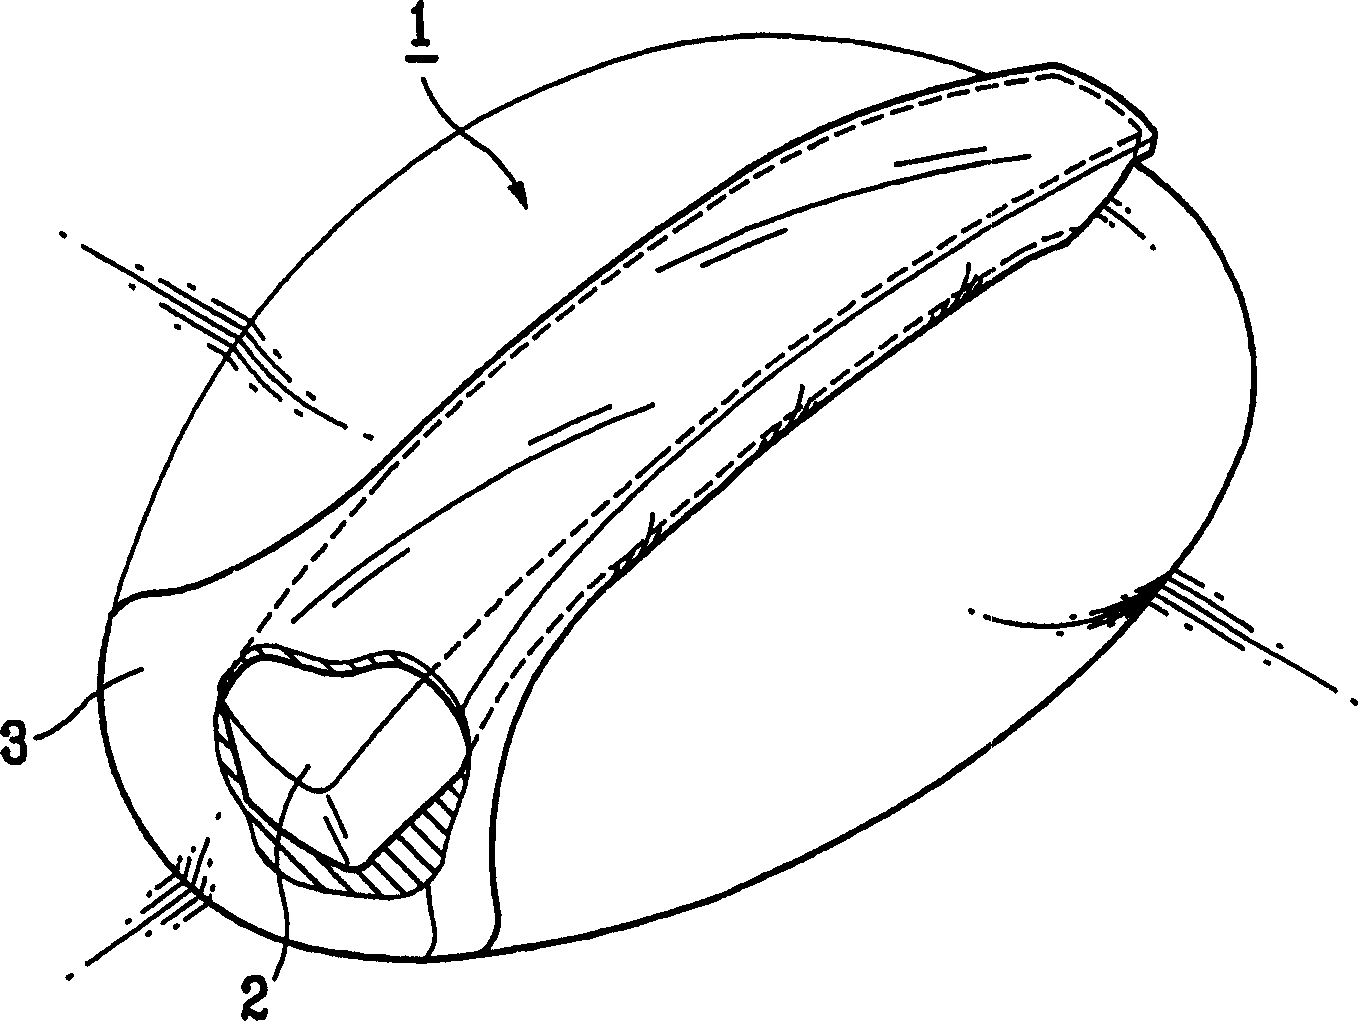 Structure of handgrip and method for fabricating the same